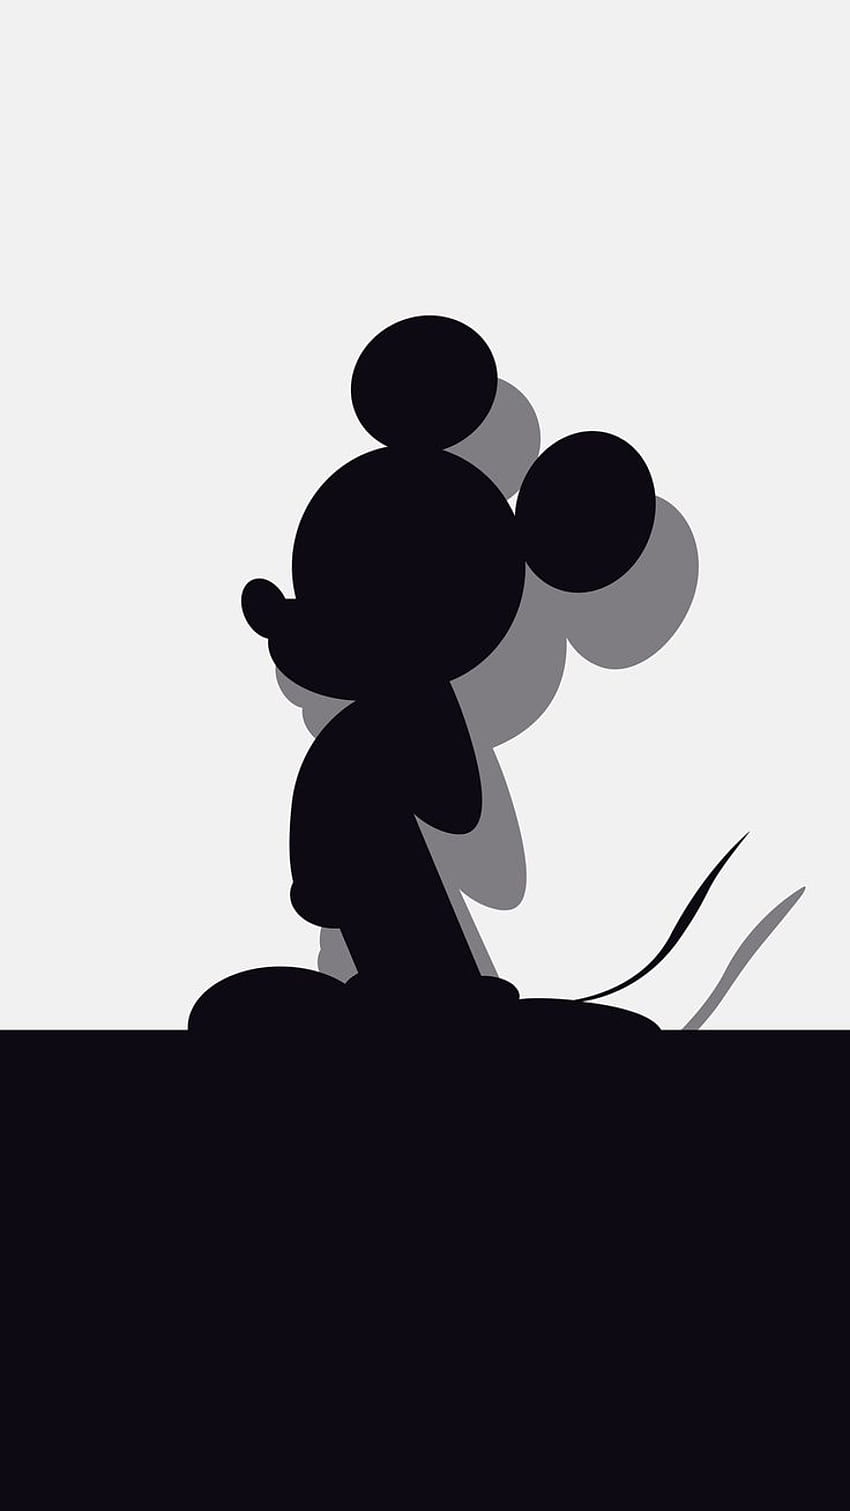 Mickey Mouse 漫画, キャラクター, かわいい, フィクション, Mickey Mou をもっと見つけてください。 Mickey mouse , Mickey mouse iphone, Mickey mouse drawing, Black Minnie Mouse HD電話の壁紙